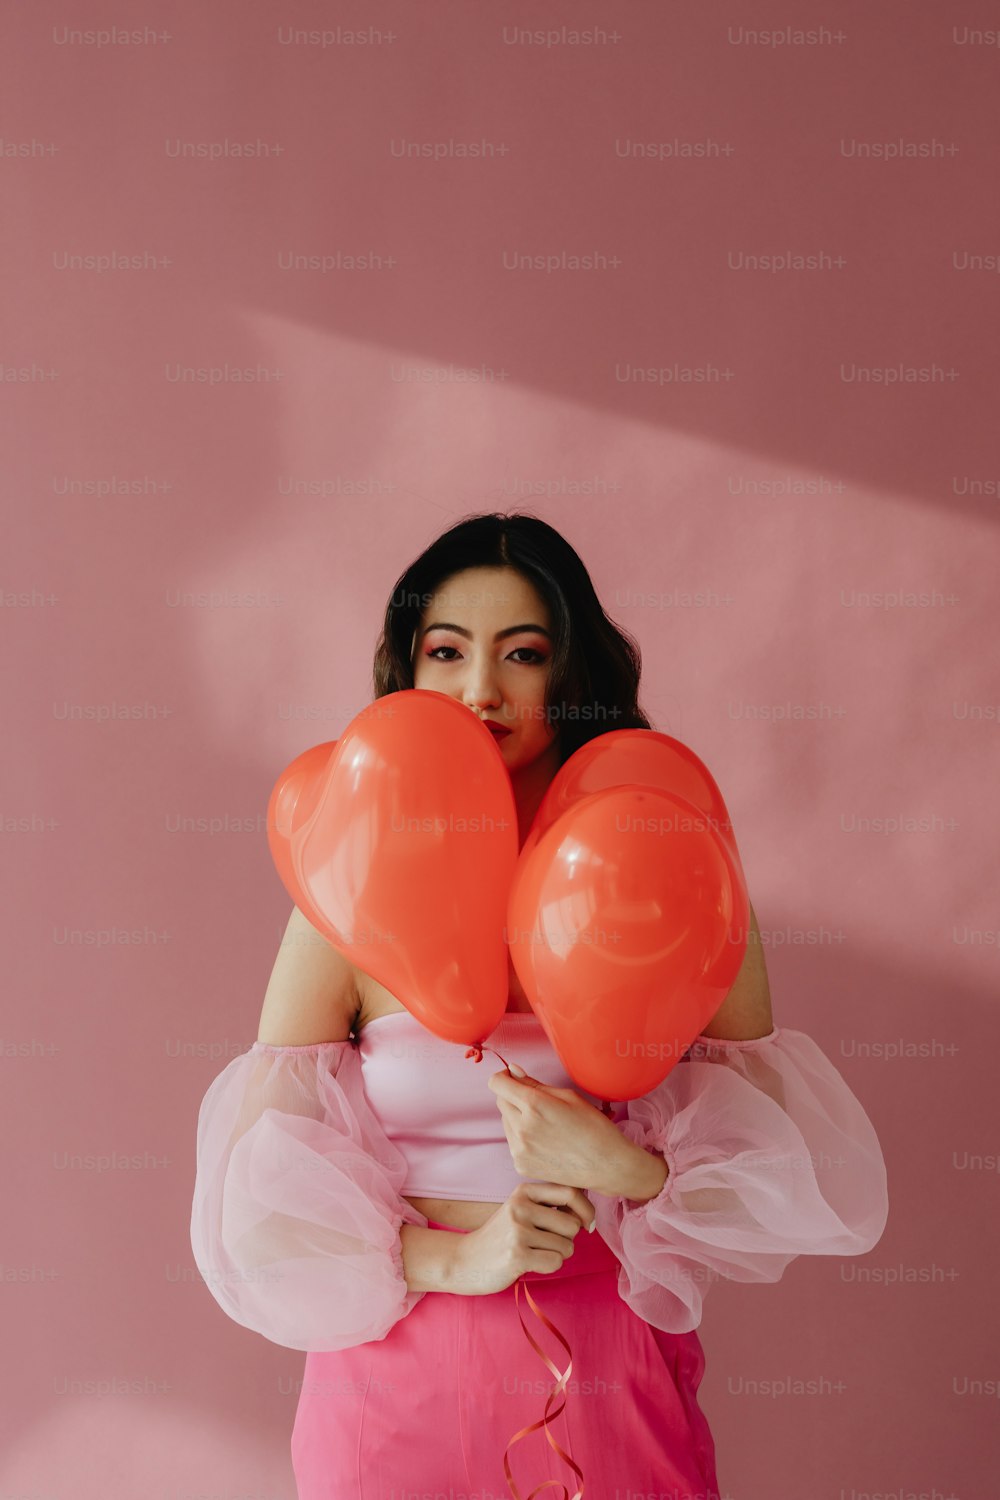 a woman in a pink dress holding balloons